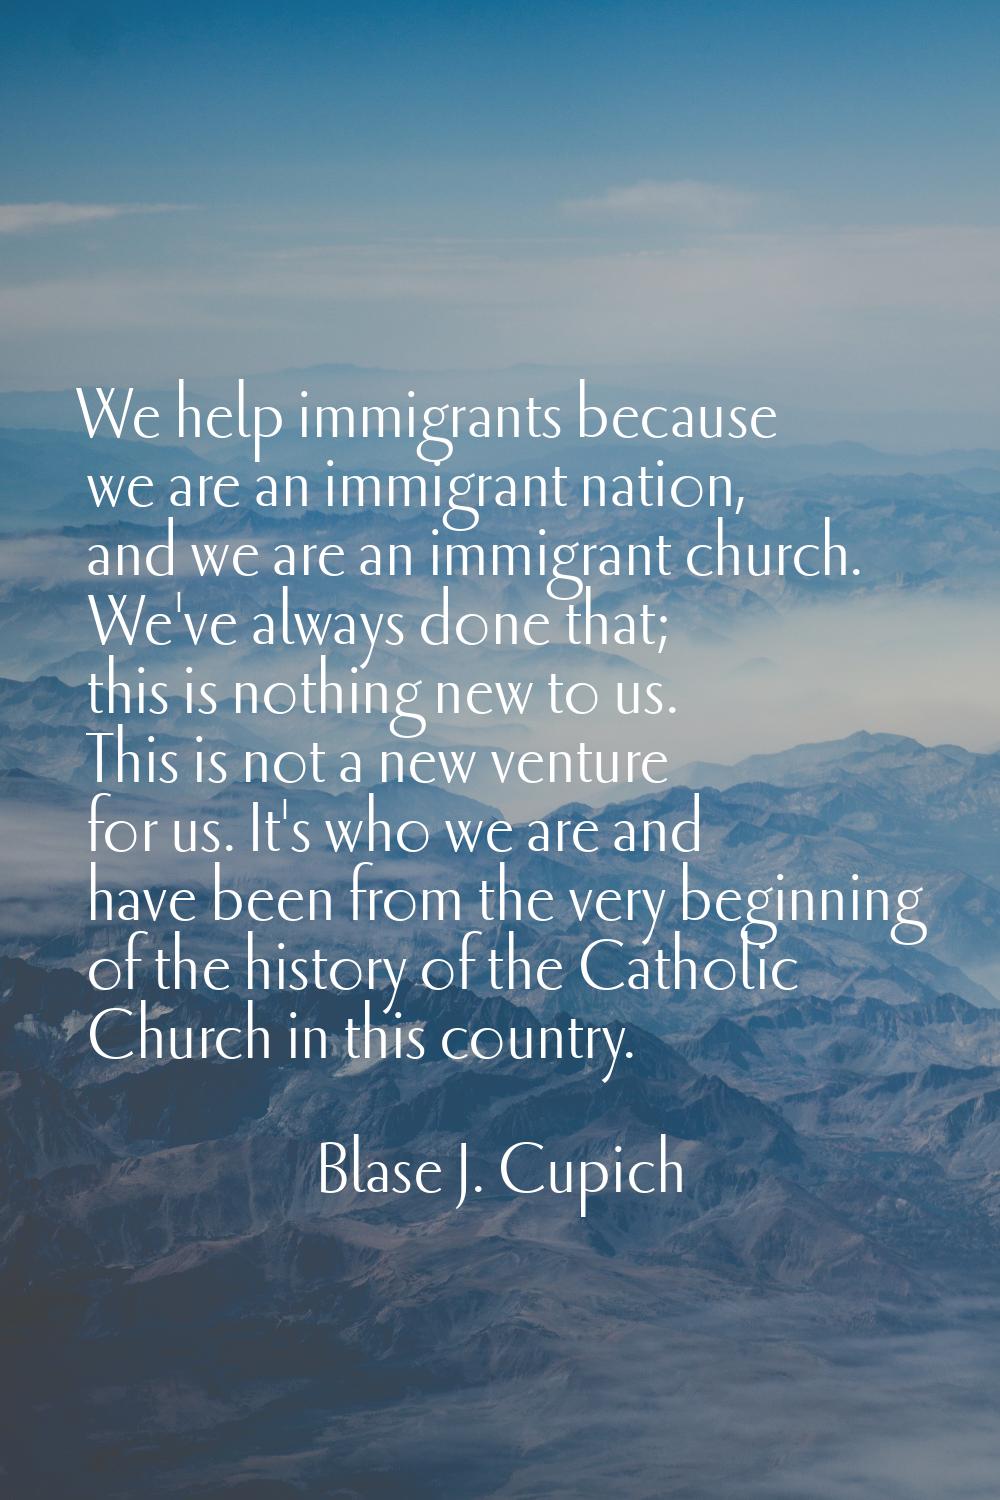 We help immigrants because we are an immigrant nation, and we are an immigrant church. We've always